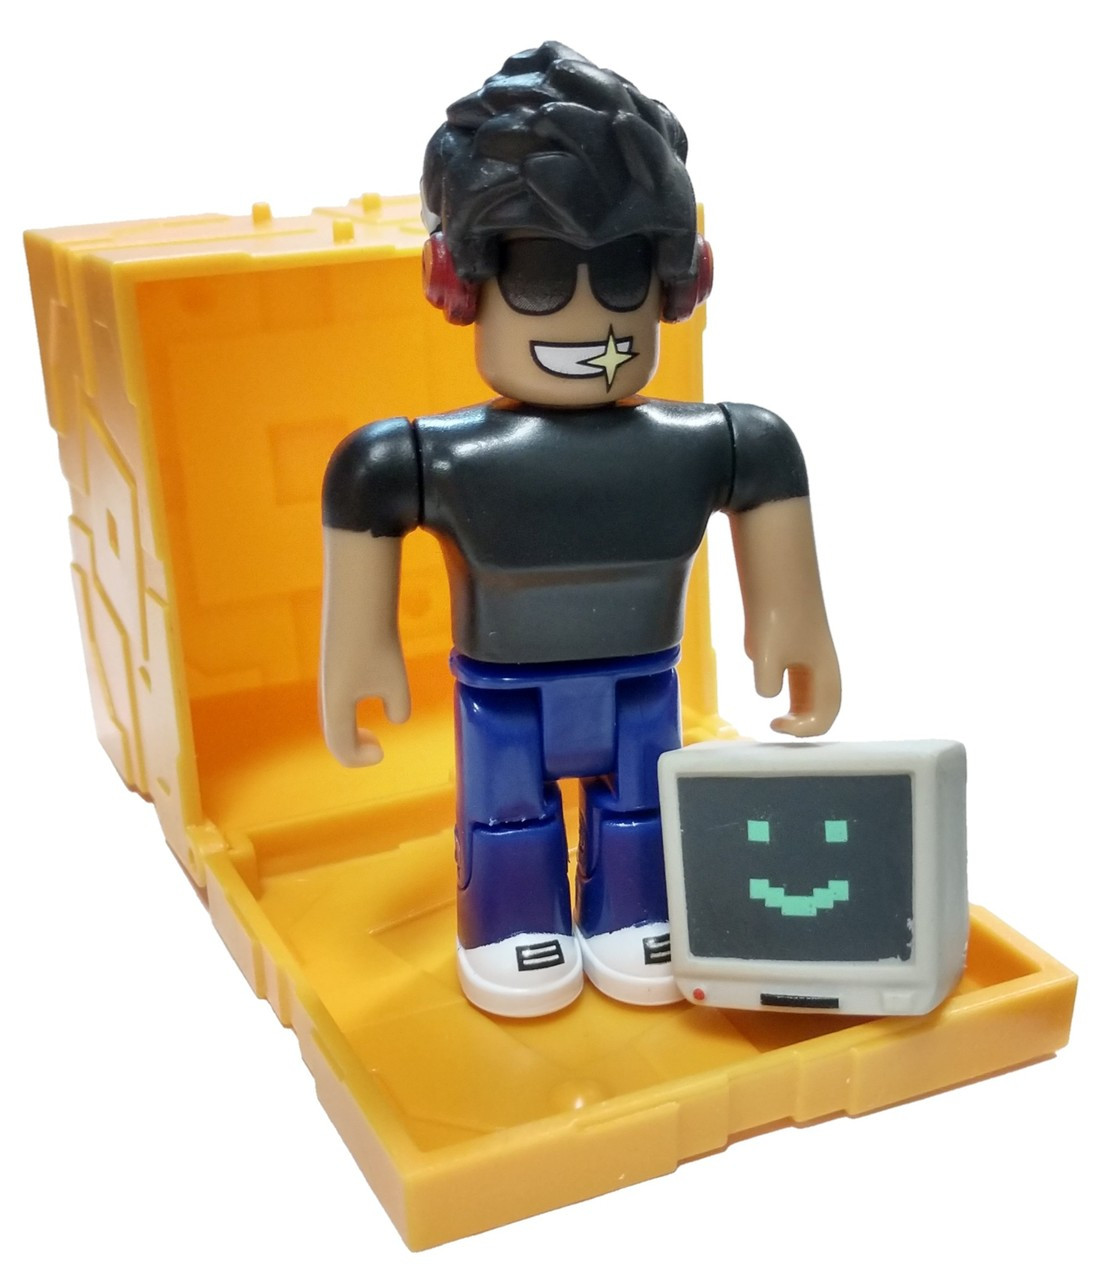 Roblox Series 5 Simbuilder 3 Mini Figure With Gold Cube And Online - roblox series 3 the beast mini figure without code loose